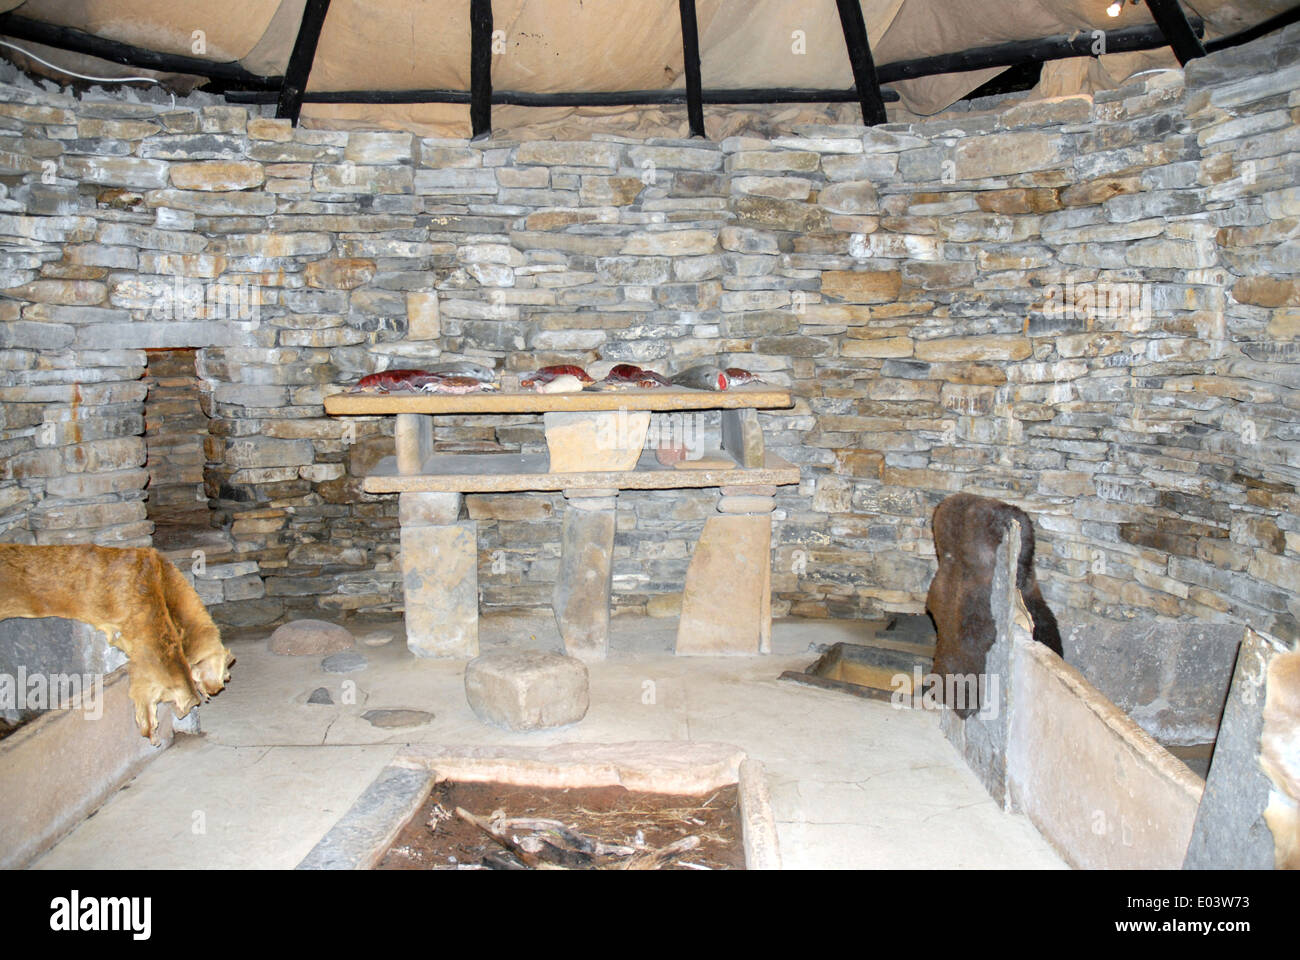 Skara Brae neolithic settlement, Bay of Skaill, Mainland, Orkney. Interior of reconstructed dwelling. Stock Photo